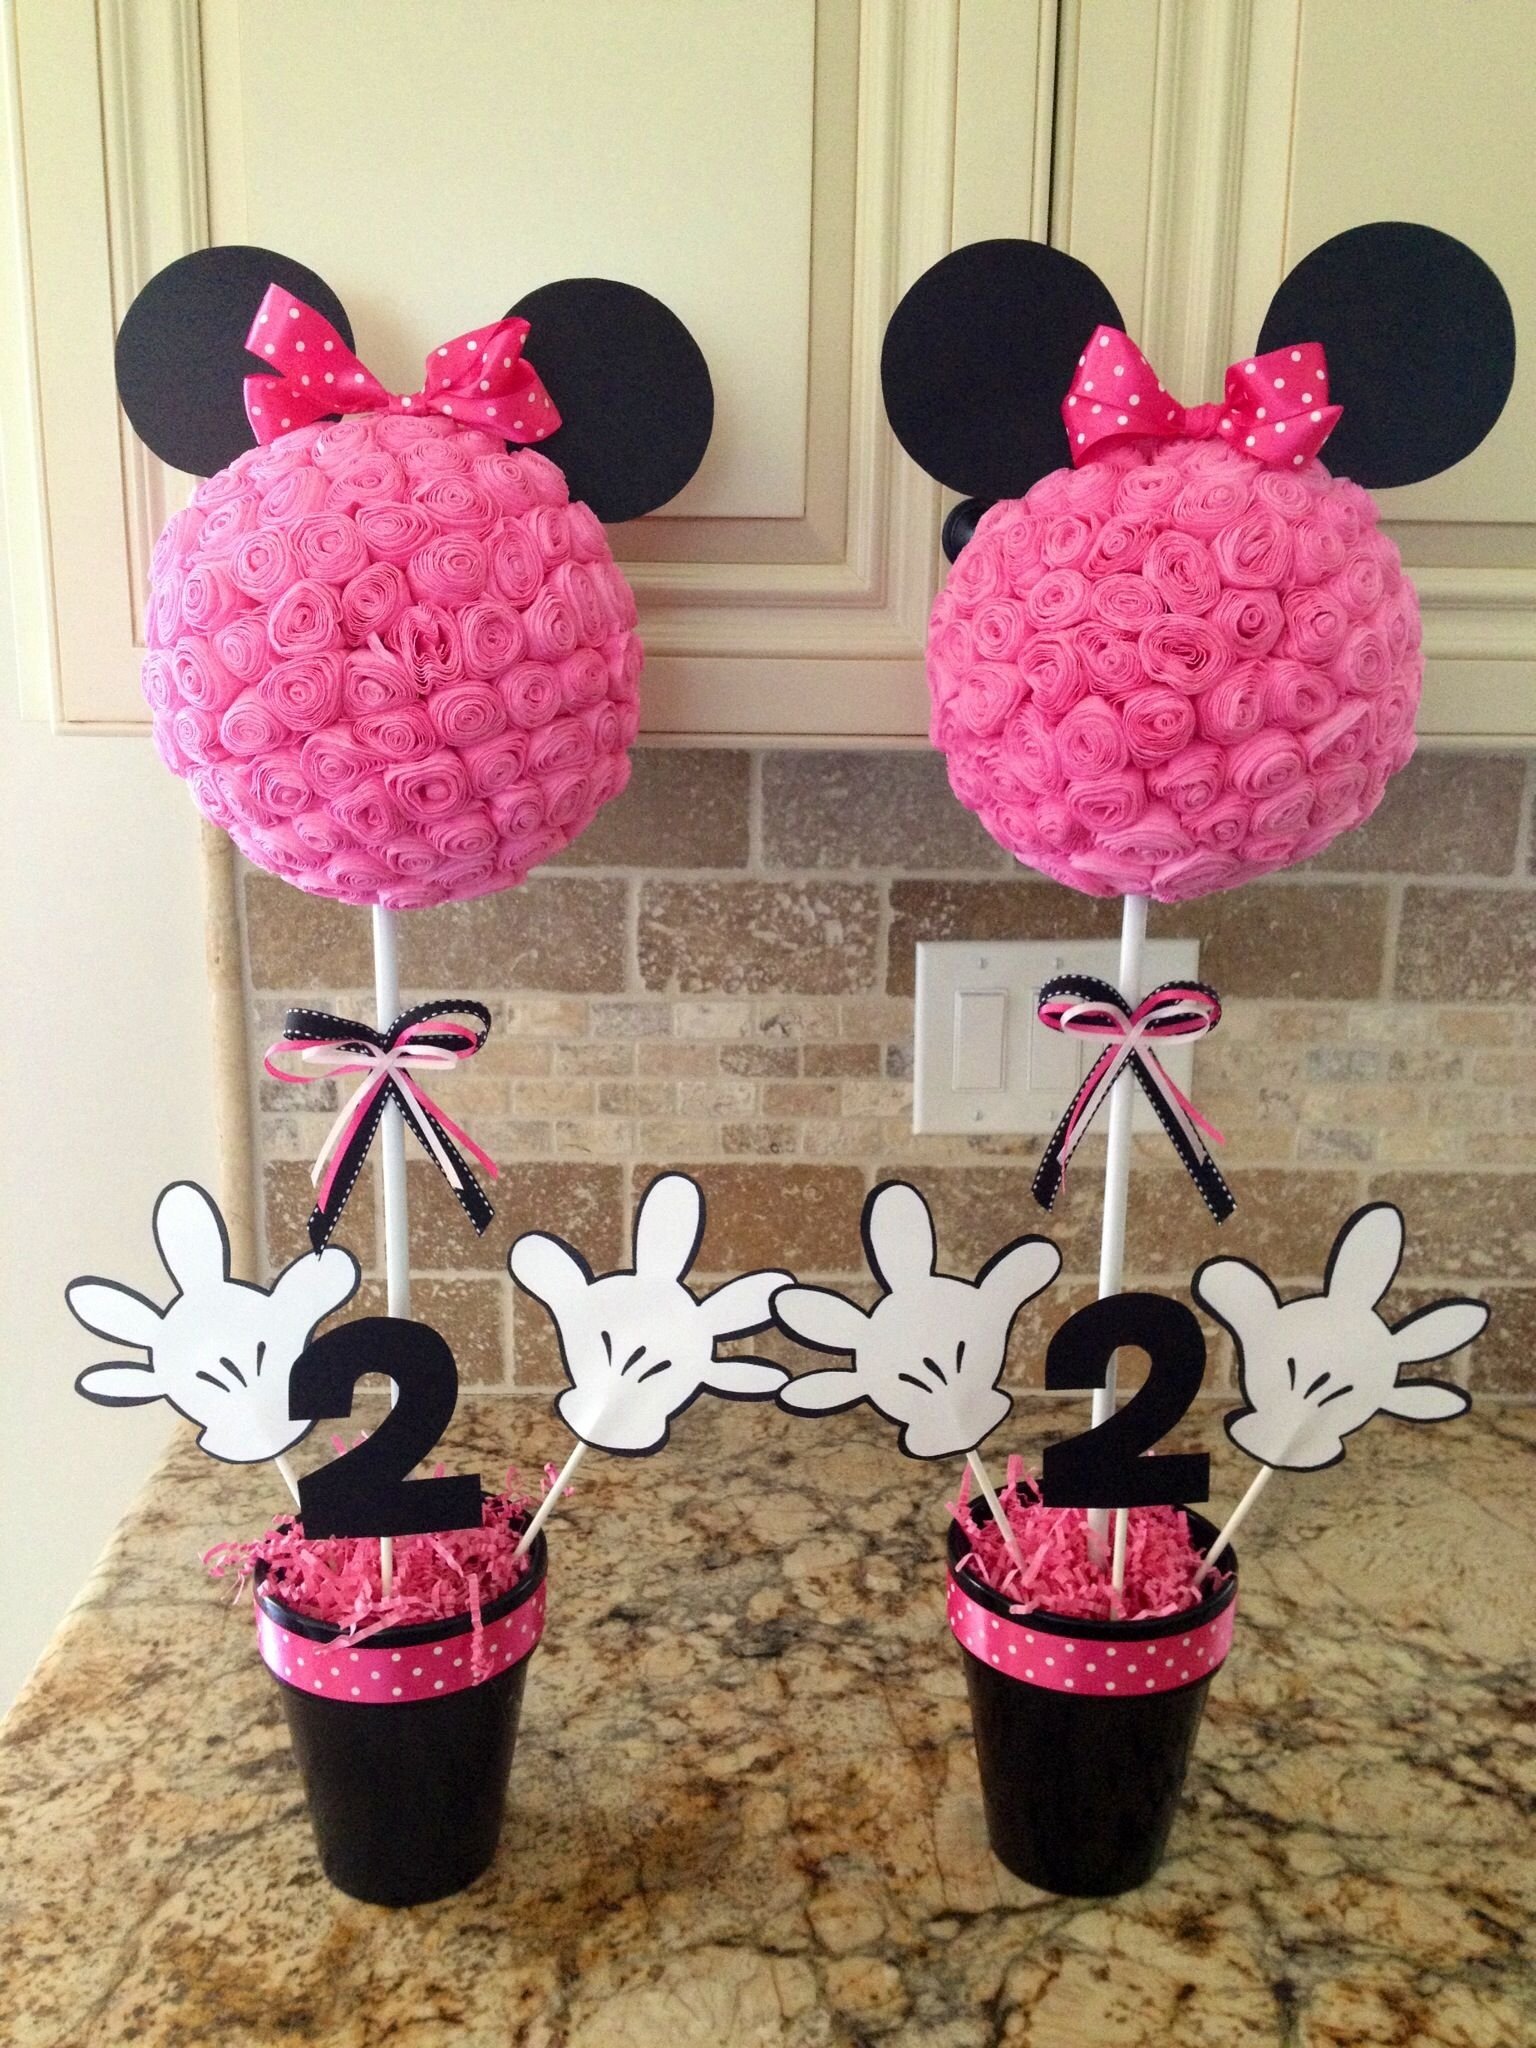 10 Lovable Minnie Mouse Birthday Party Ideas minnie mouse centerpieces minnie mouse pinterest minnie mouse 6 2023